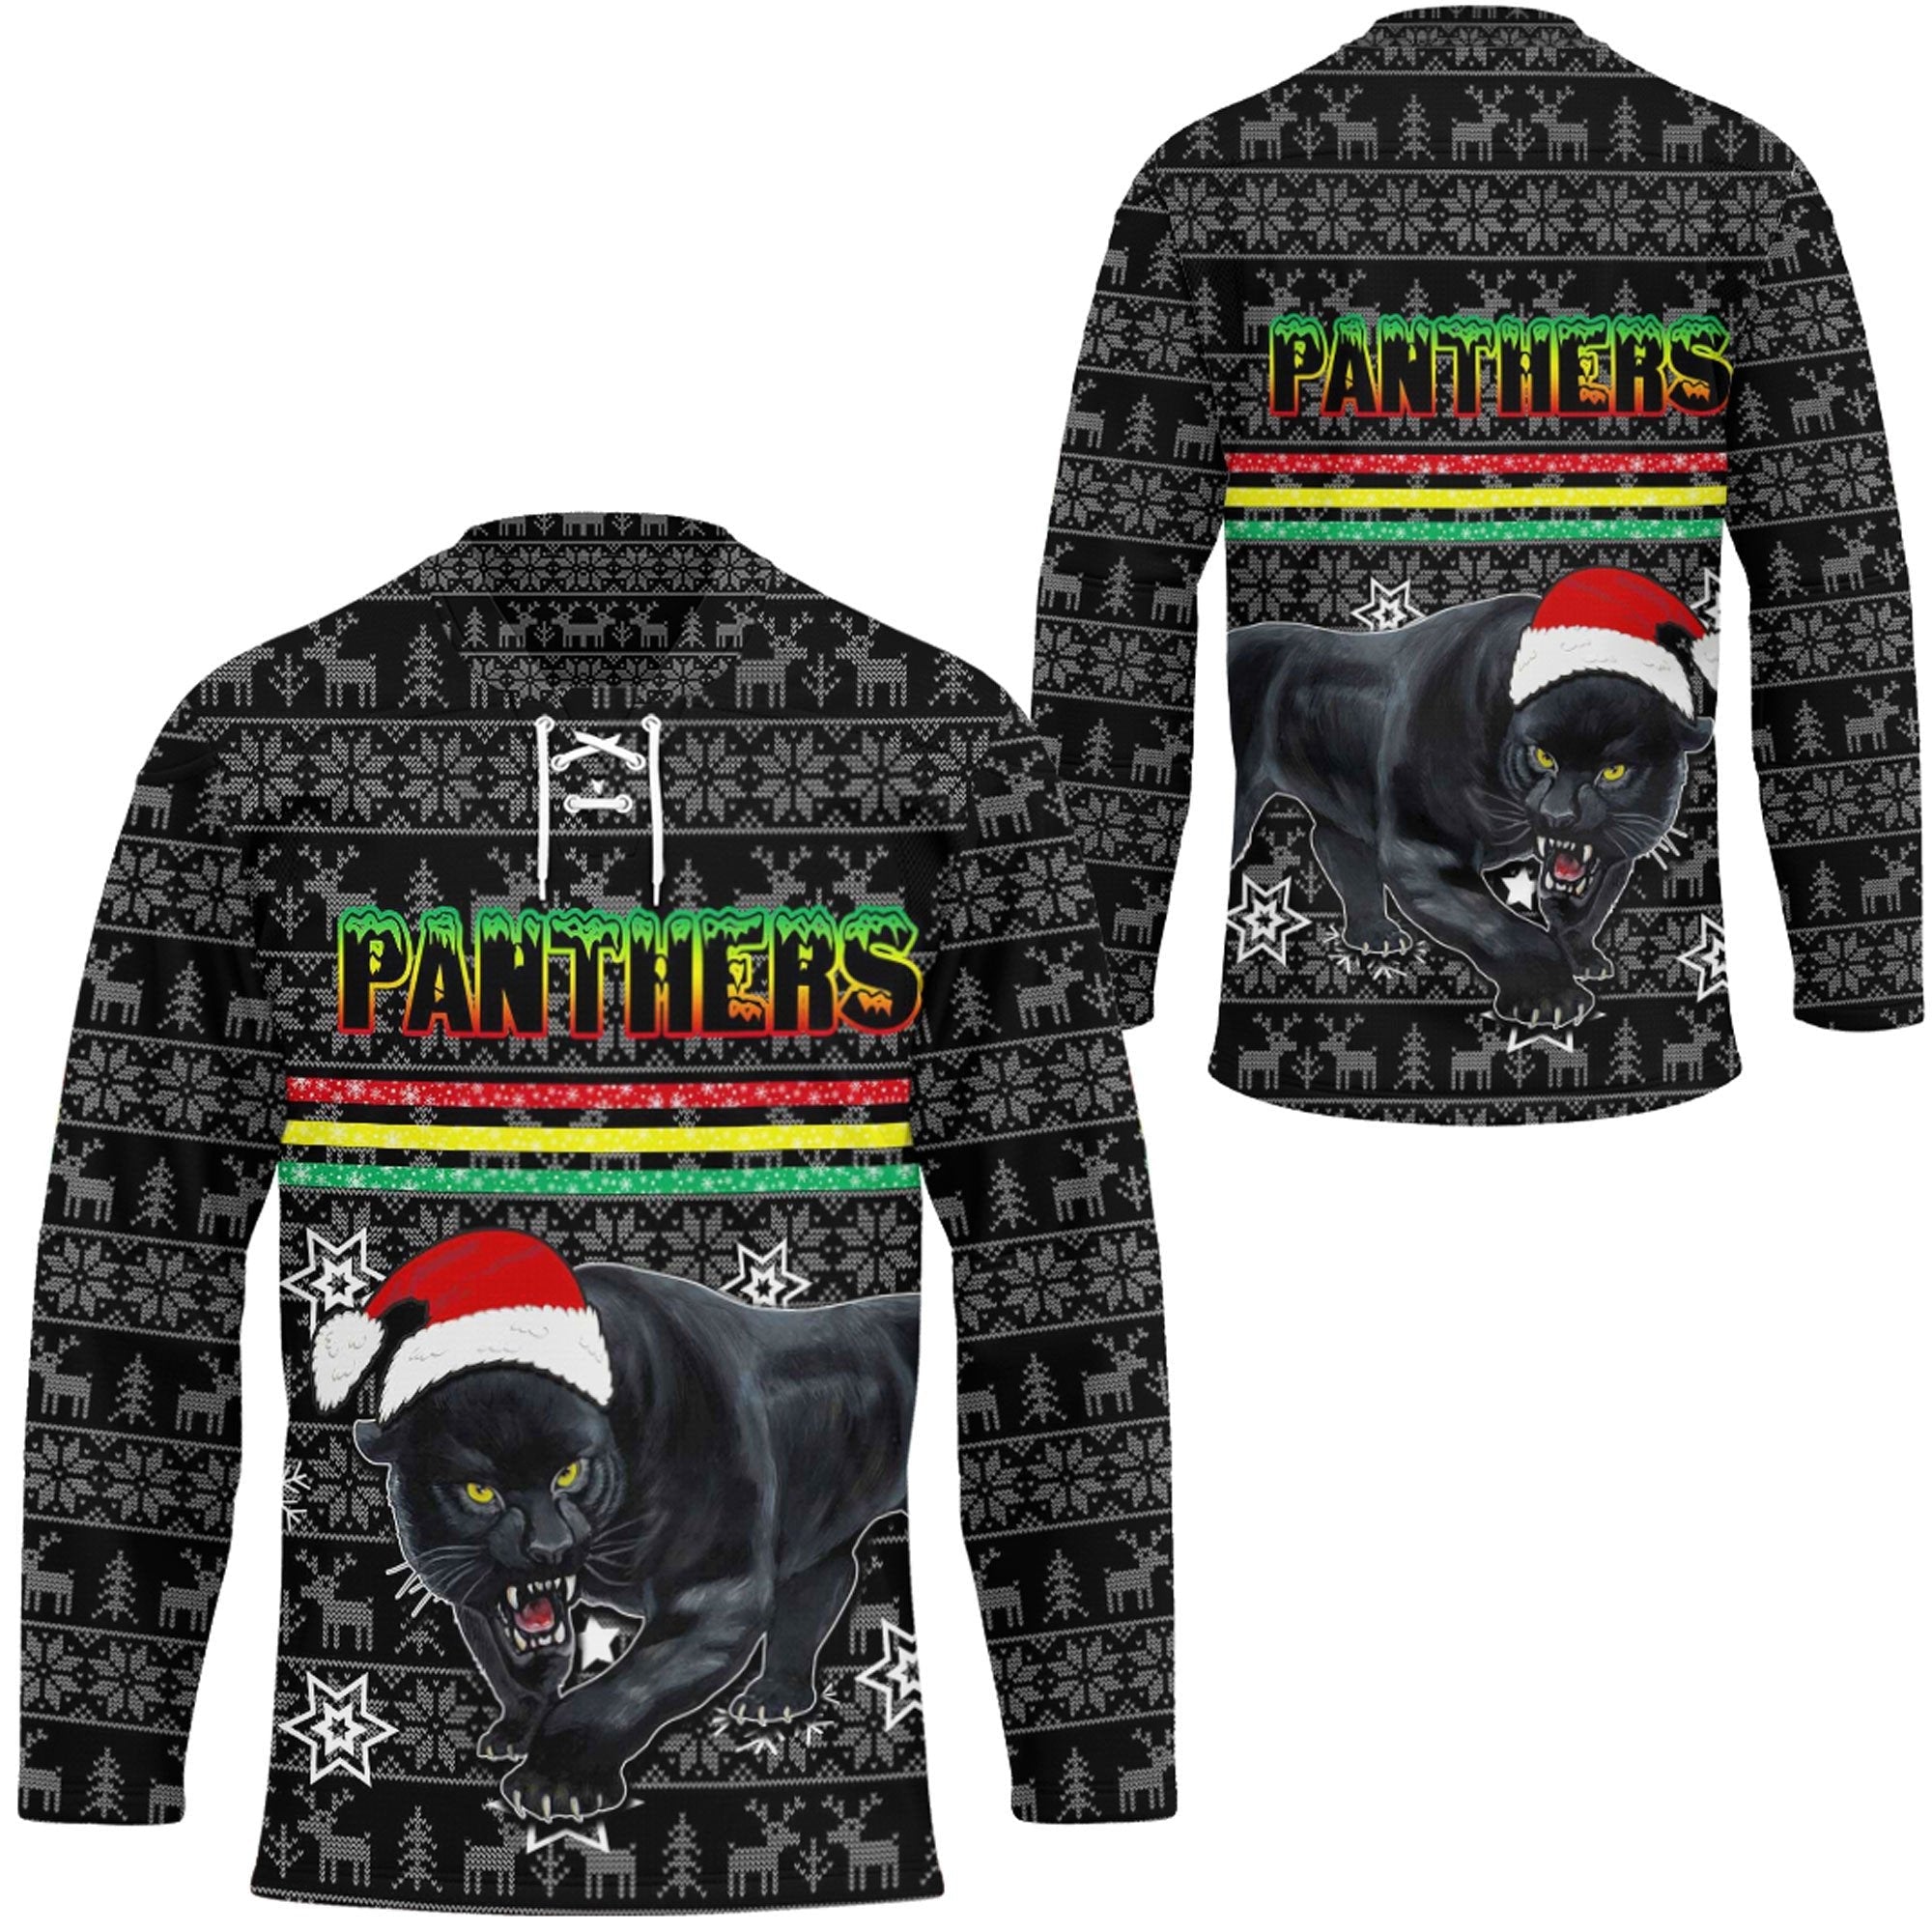 vibe-hoodie-clothing-penrith-panthers-christmas-hockey-jersey